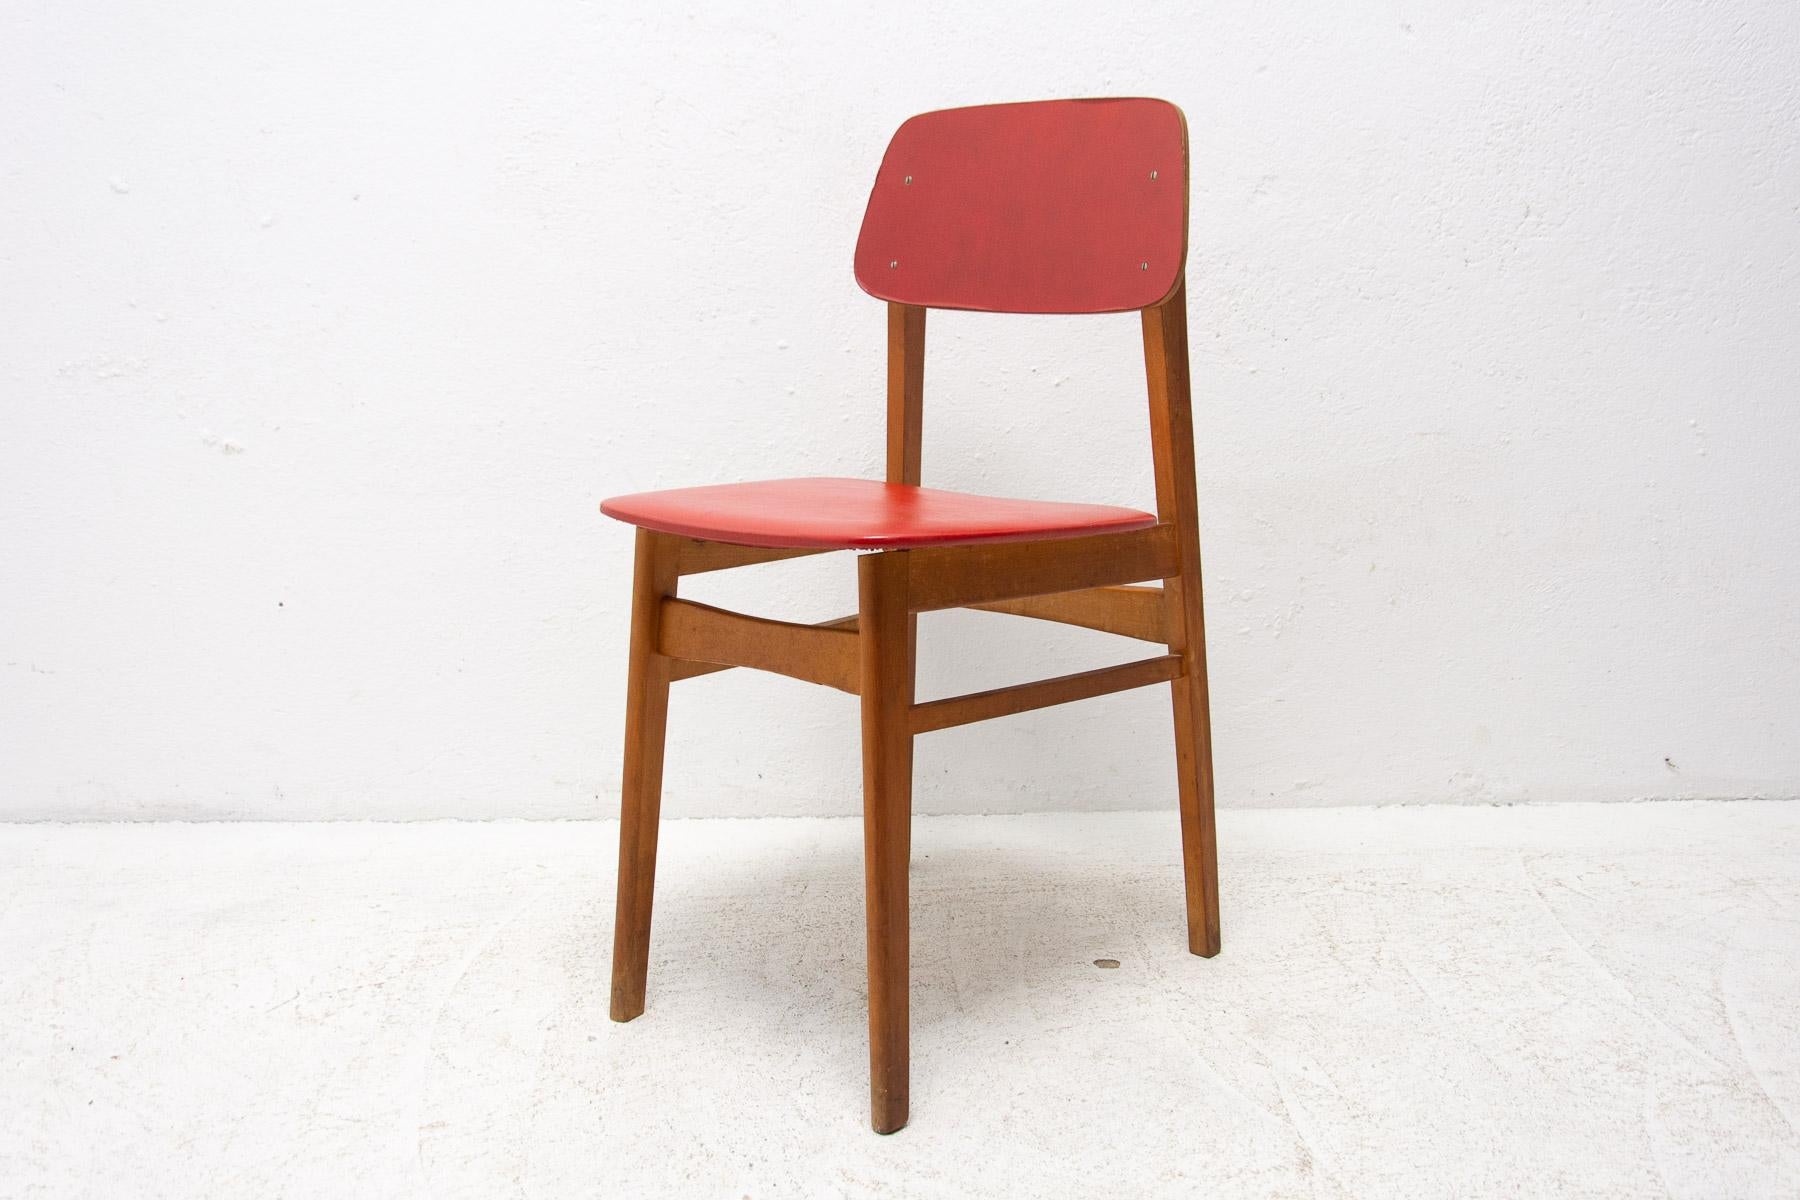 This mid century chair was made in the former Czechoslovakia, asociated with Brussels period after EXPO 58. Material: plastic seat and backrest, beechwood. In very good original condition.

Measures: Height: 79 cm

Width: 41 cm

Depth: 44